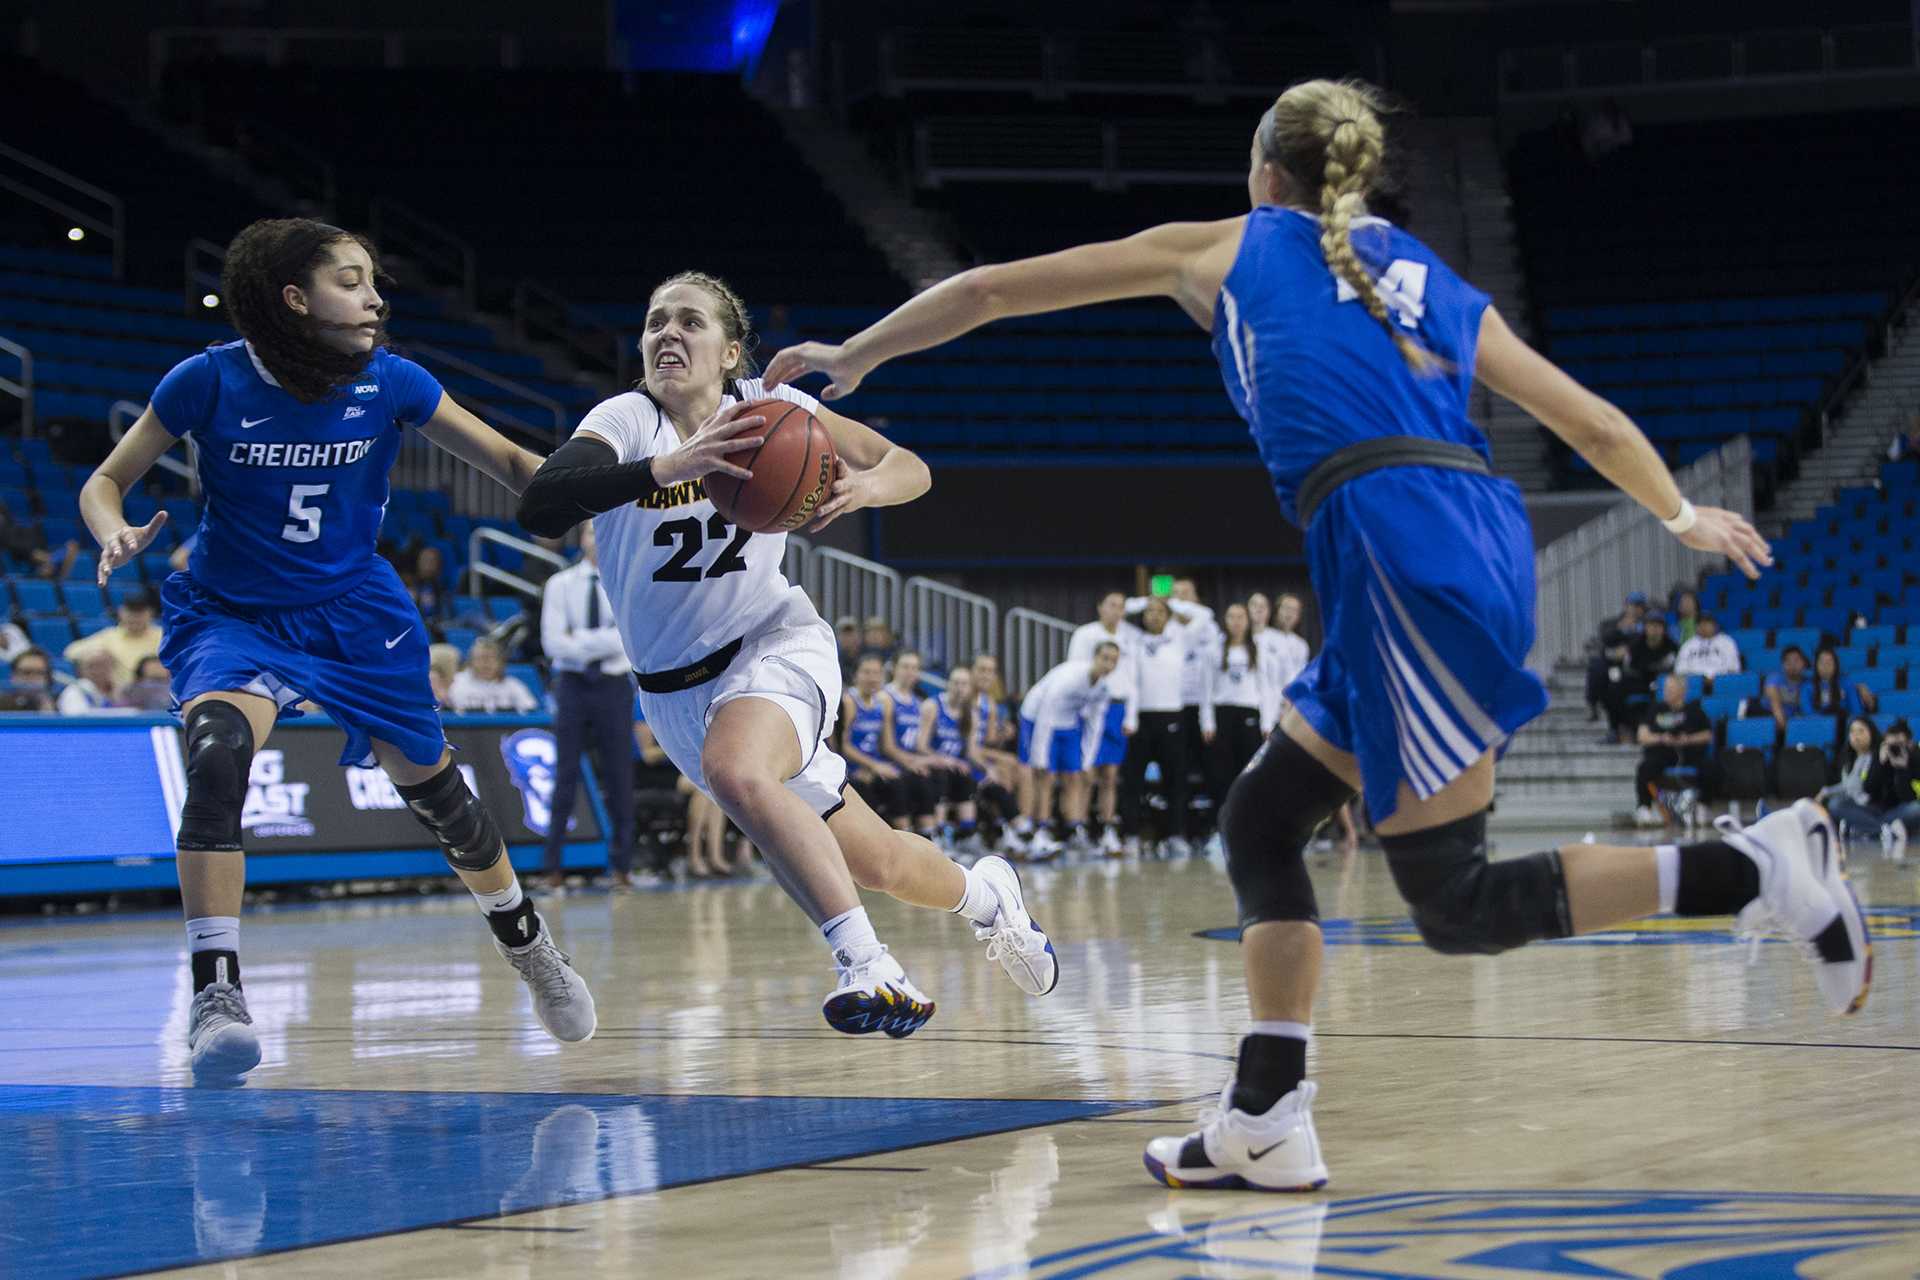 Creighton’s downpour from deep knocks Iowa out of NCAA Tournament The